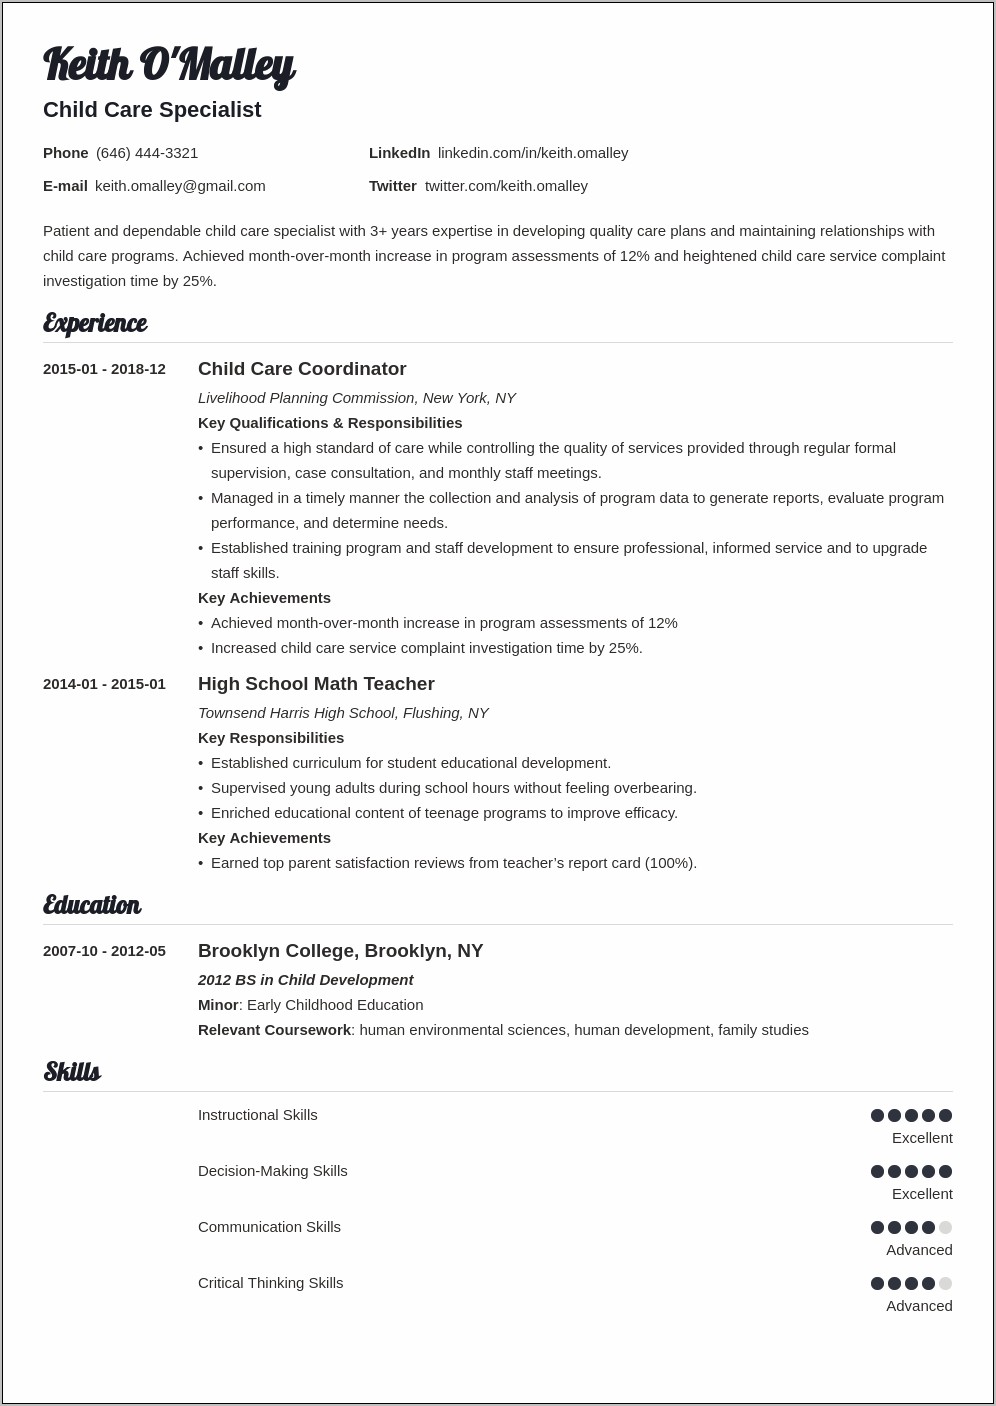 Resume To Work In A Daycare